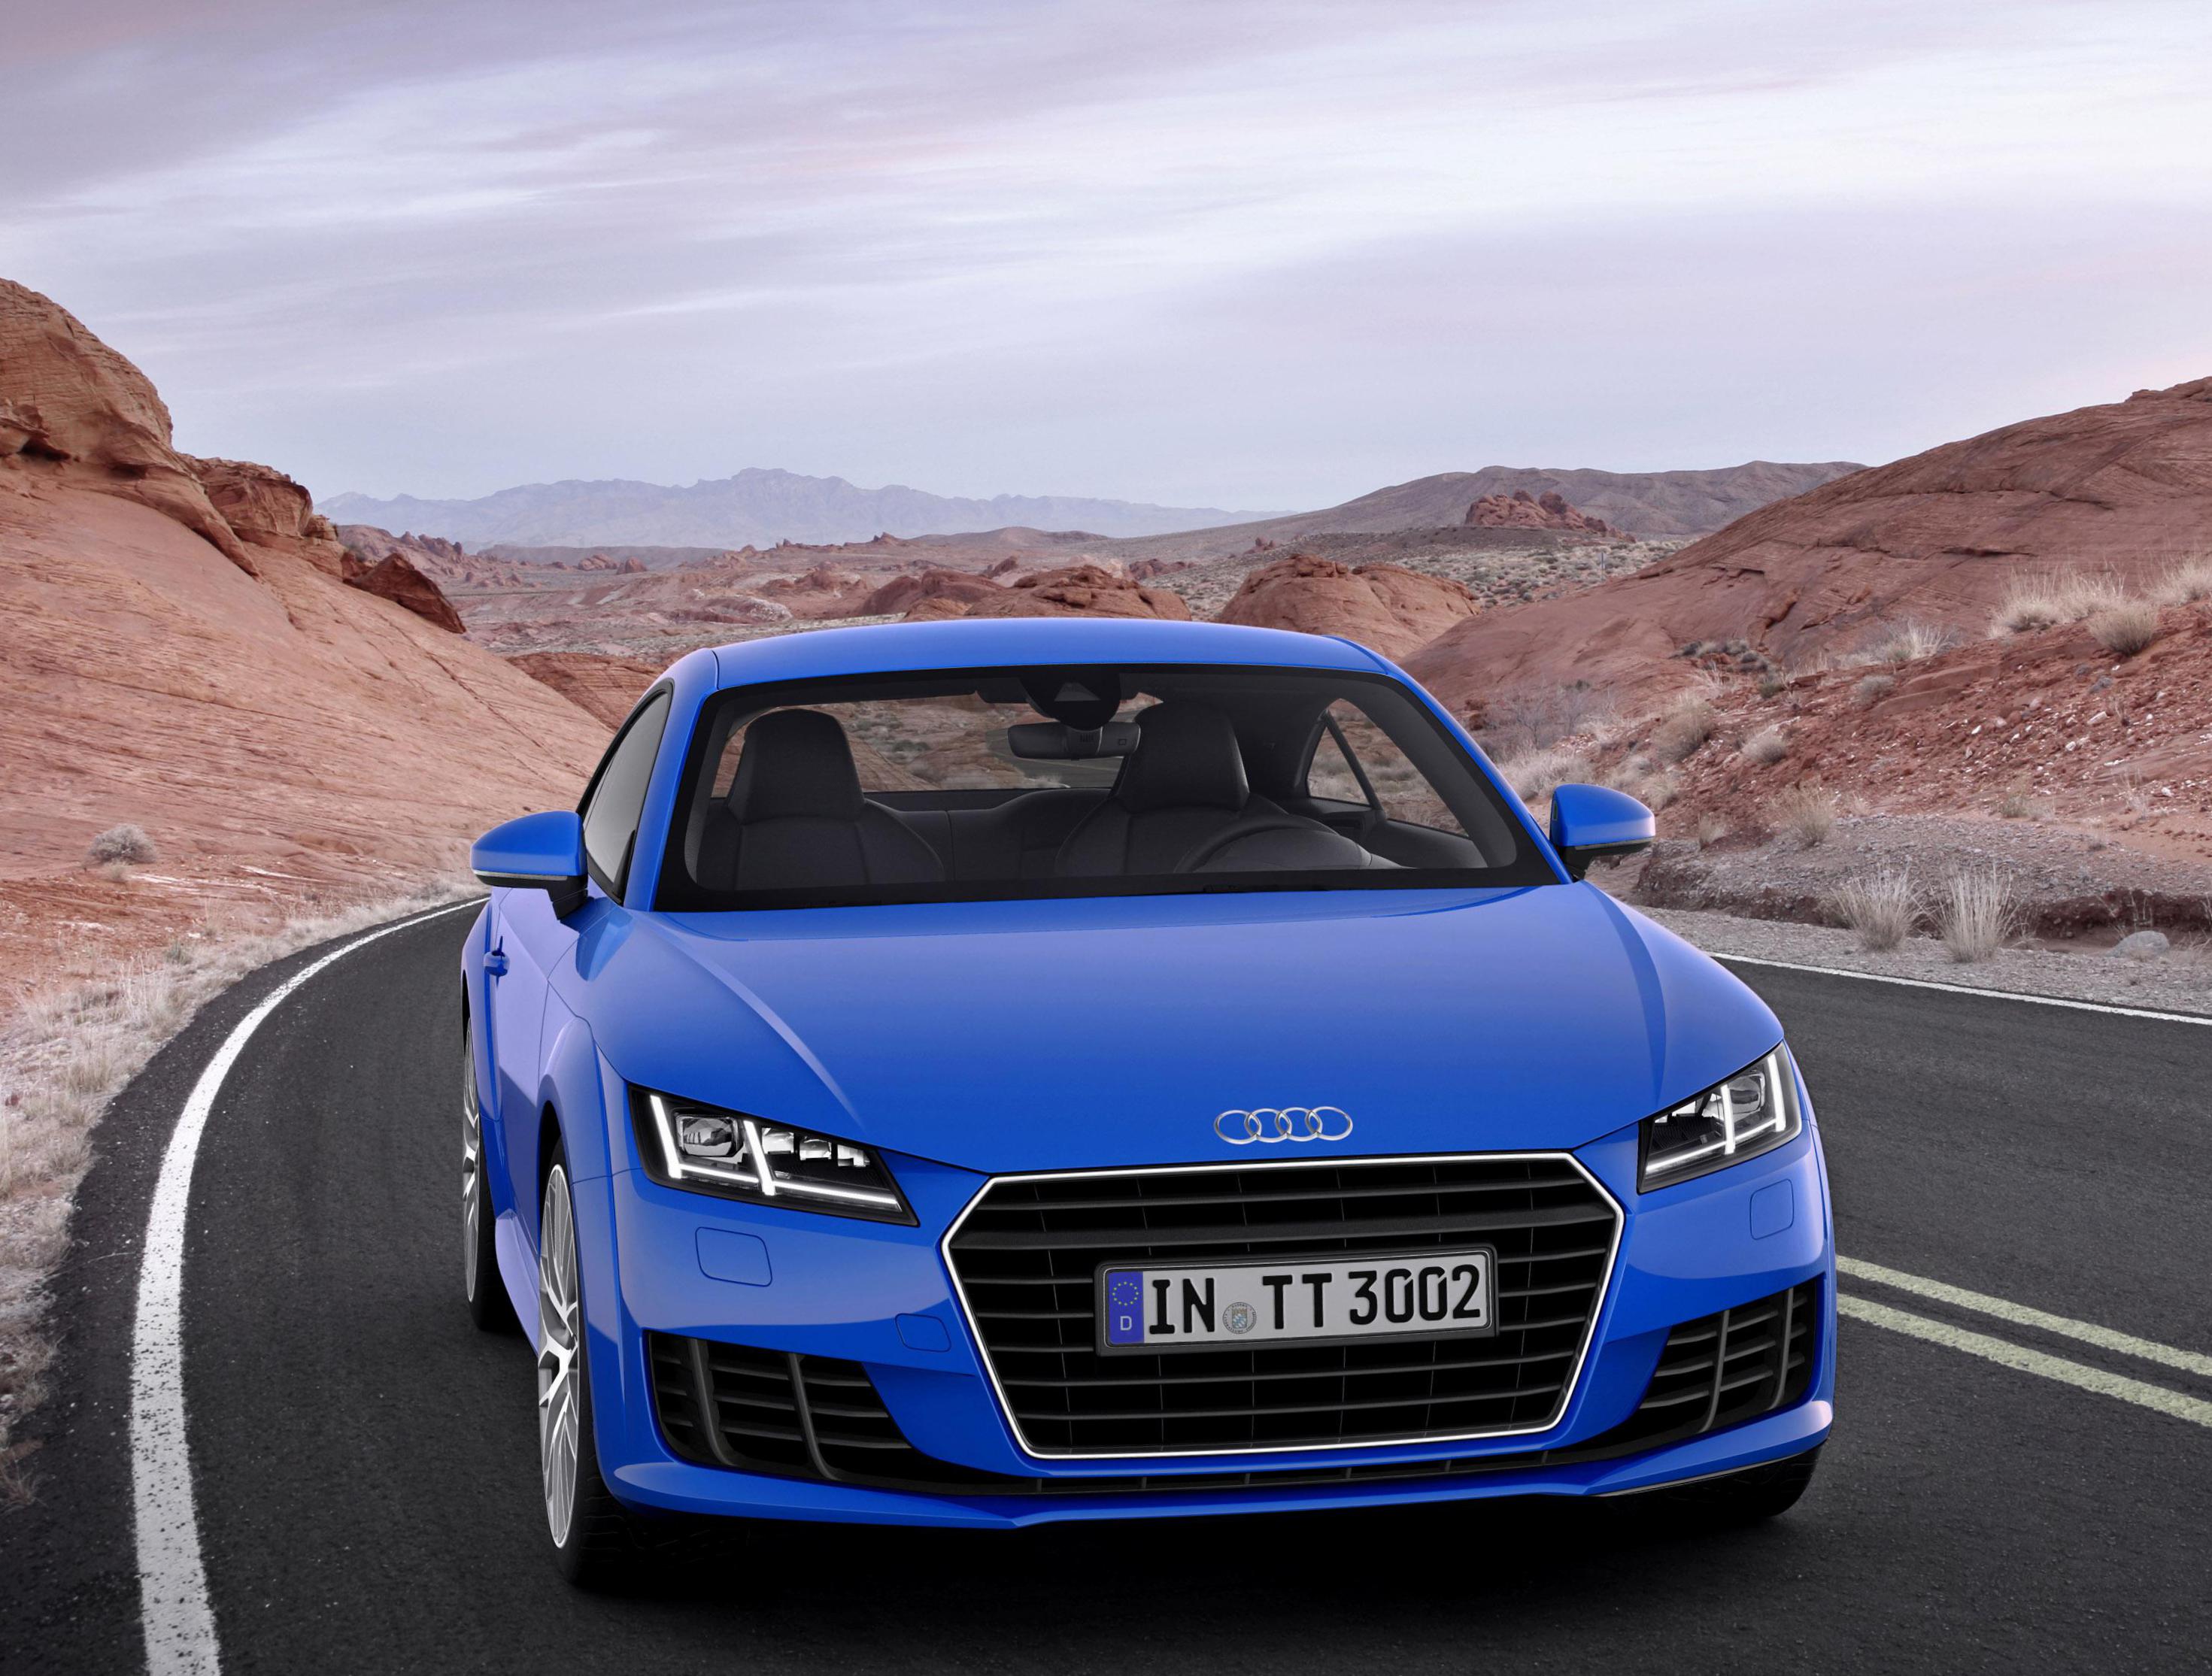 Audi TT Coupe Specifications 2013